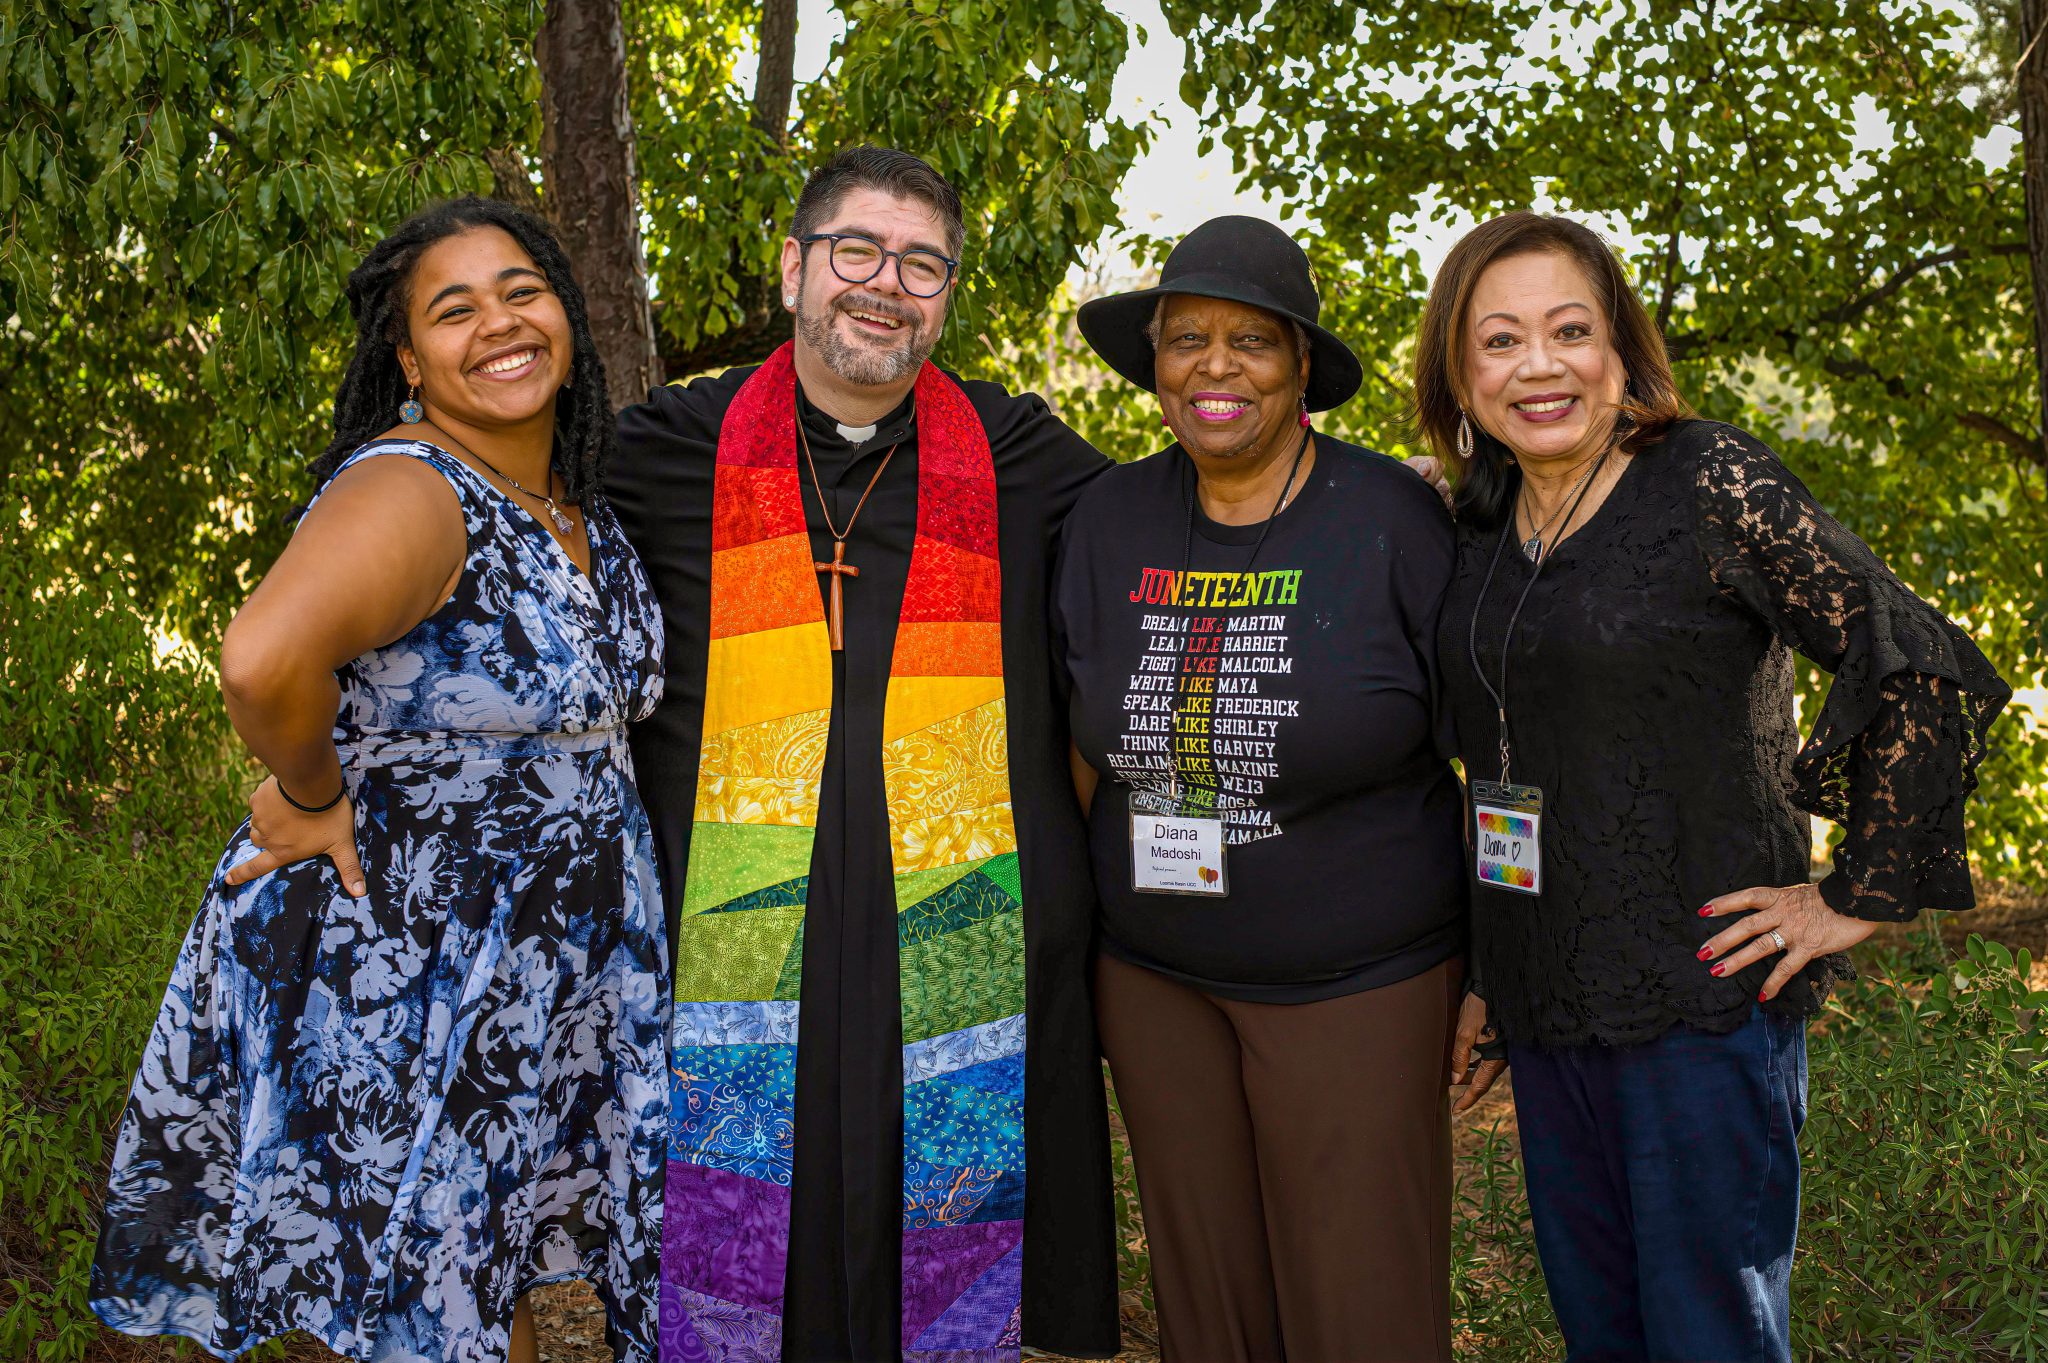 parishioners, ladies, group, happy, pastor casey tinnin, loomis basin ucc, pulpit, rainbow, happy, smiling, photojournalism, church, smiling, lgbtq, outword, article, exoneration